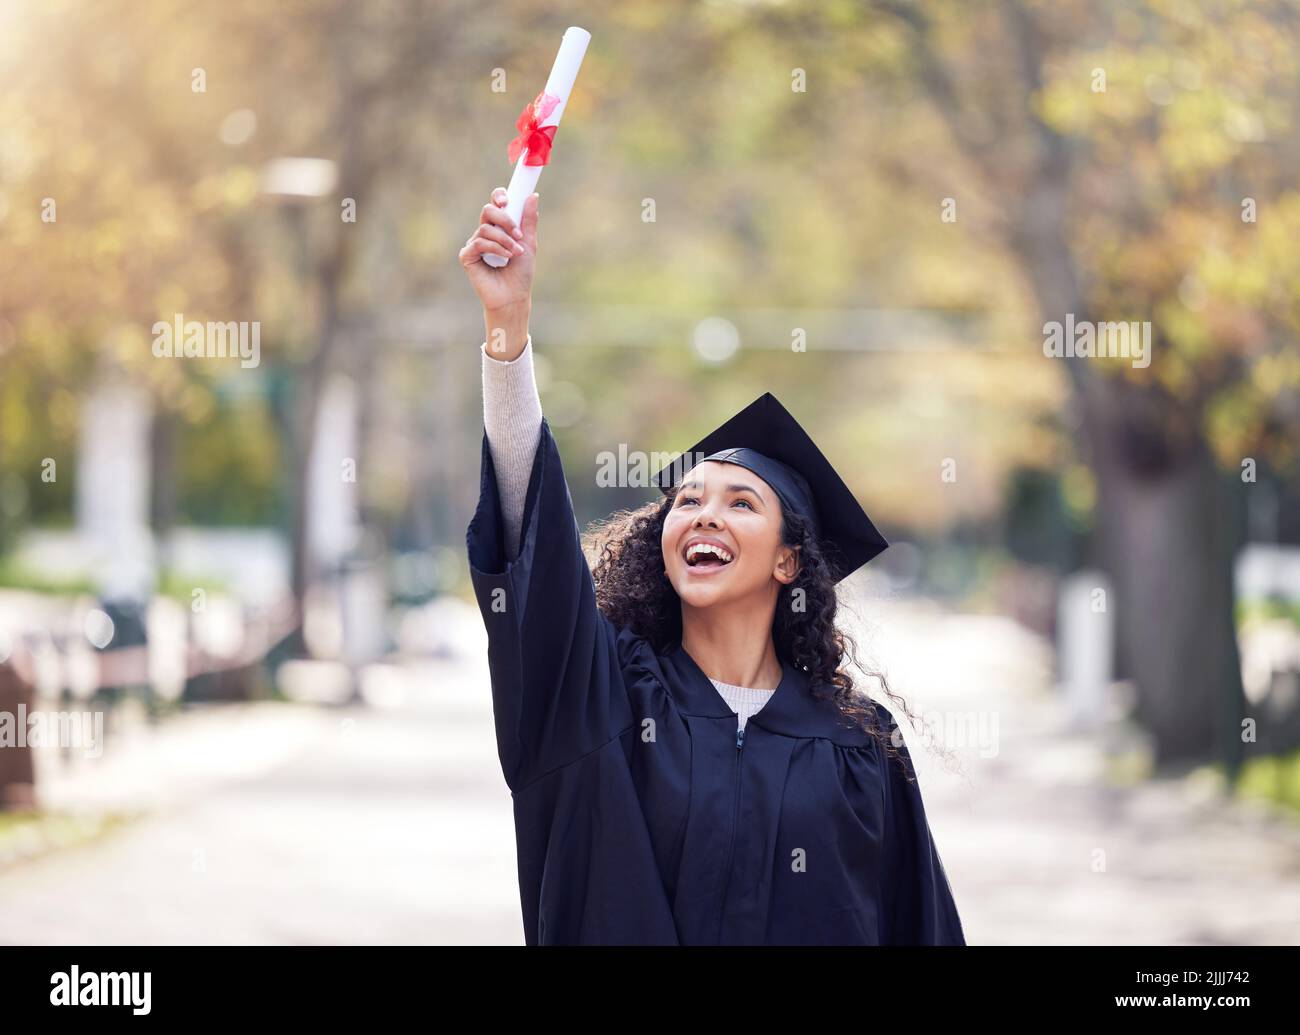 Congratulations on my graduation. a young woman cheering on graduation day. Stock Photo